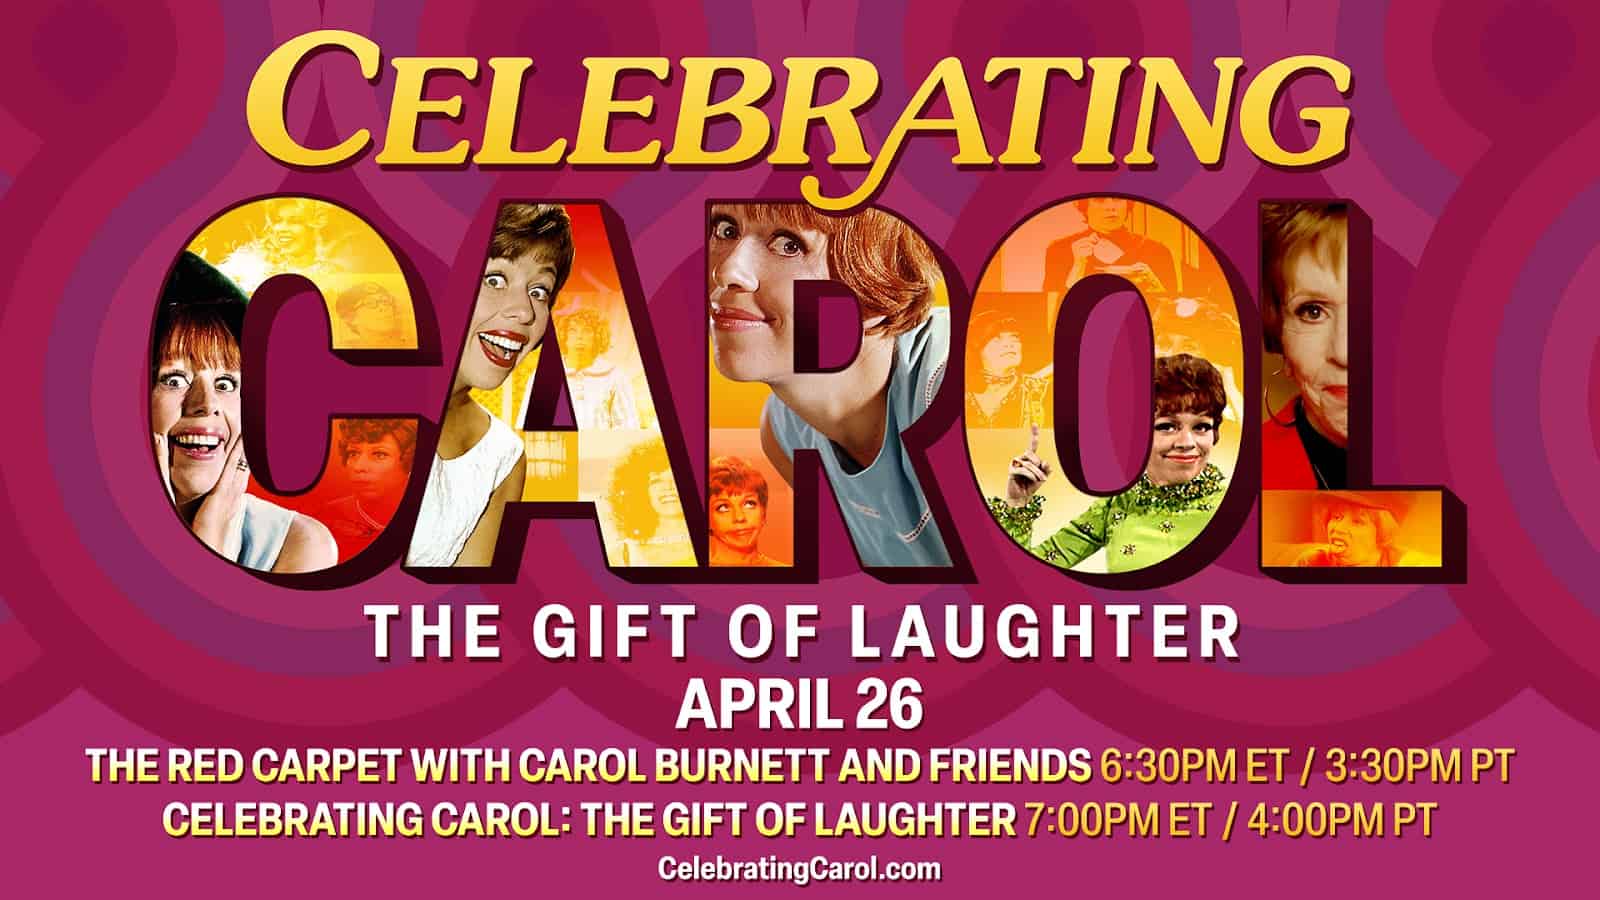 Shout! Factory TV Honors Carol Burnett with Exclusive Streaming Event. Did you watch? 17